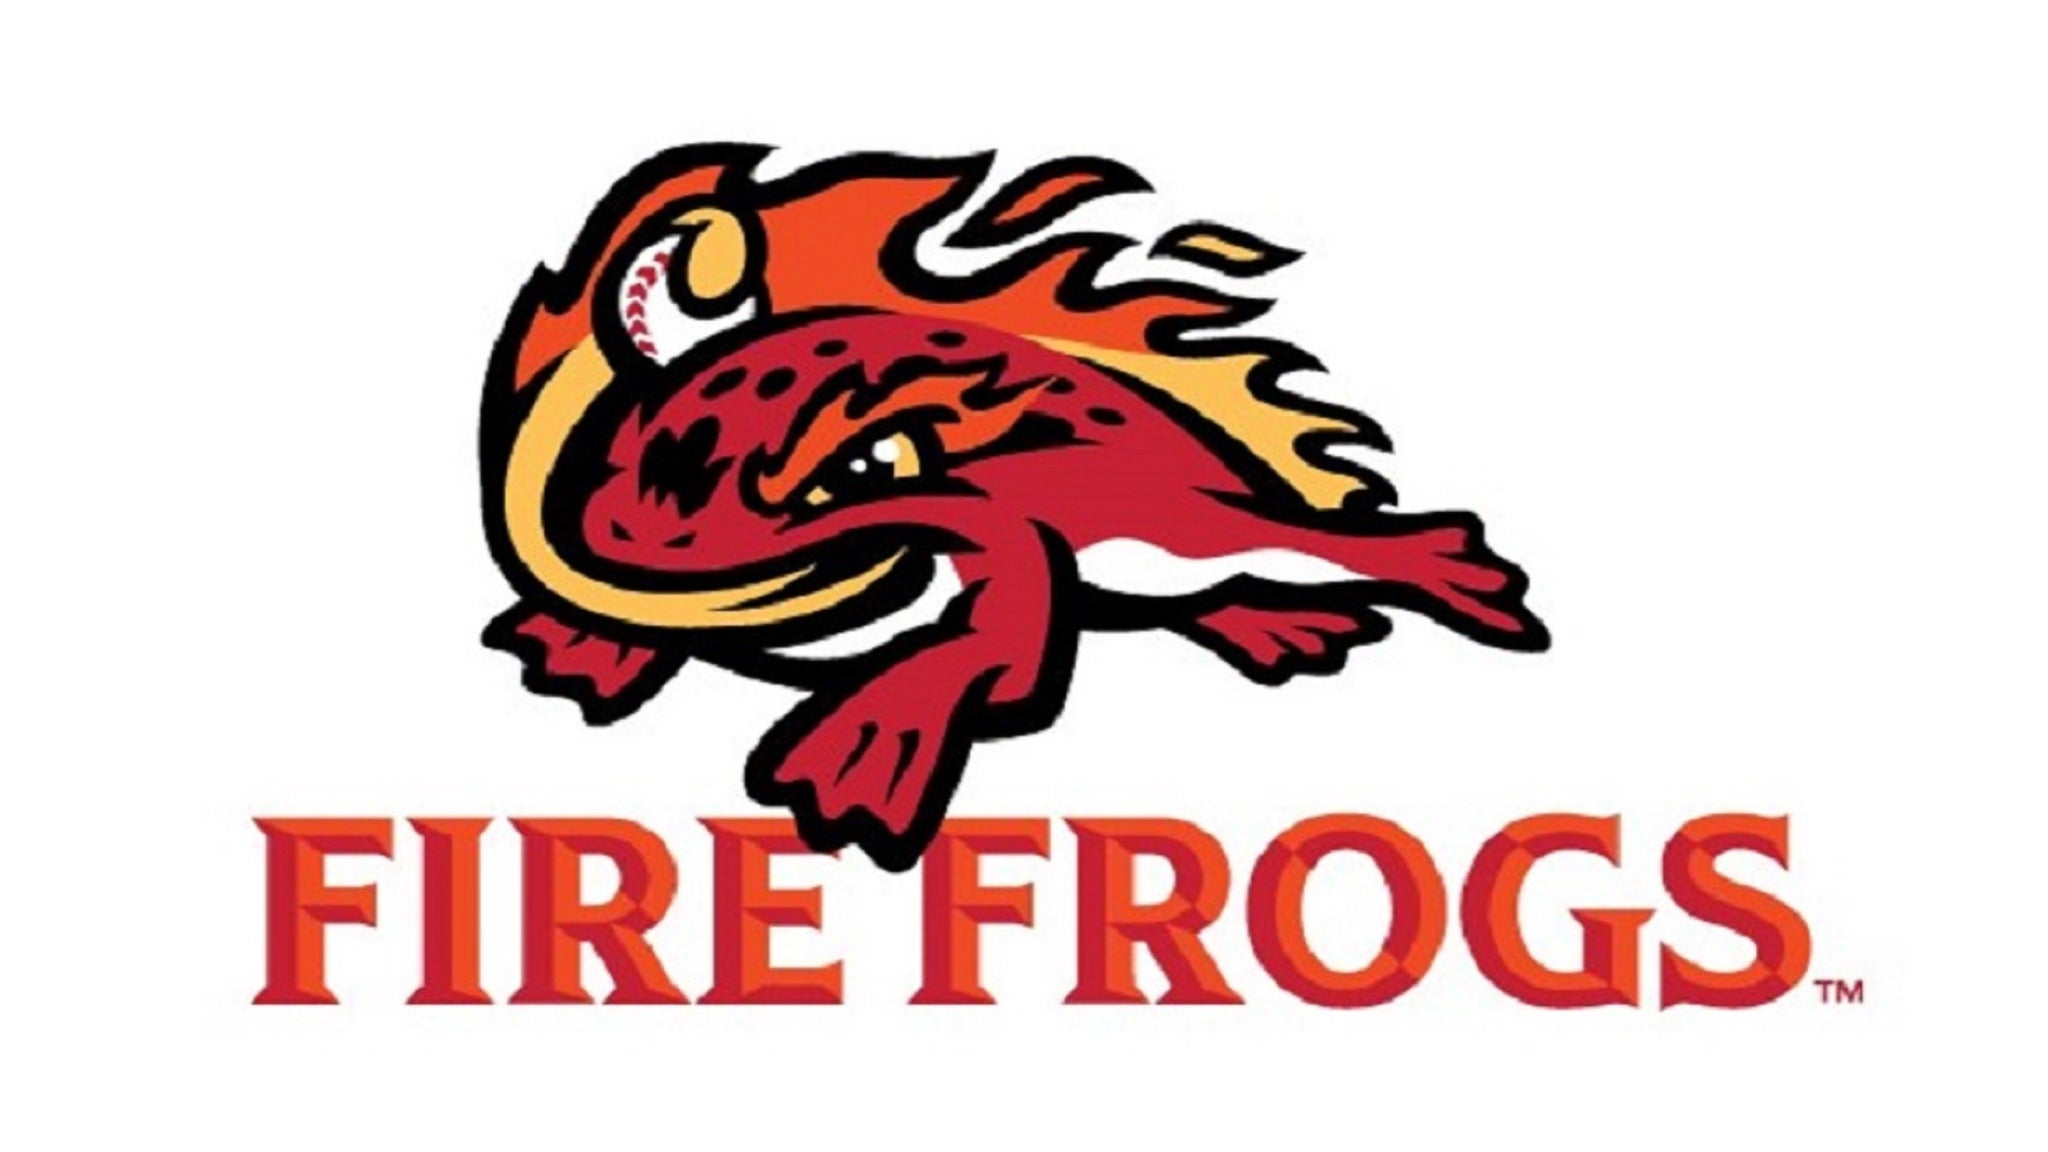 Florida Fire Frogs vs. St. Lucie Mets